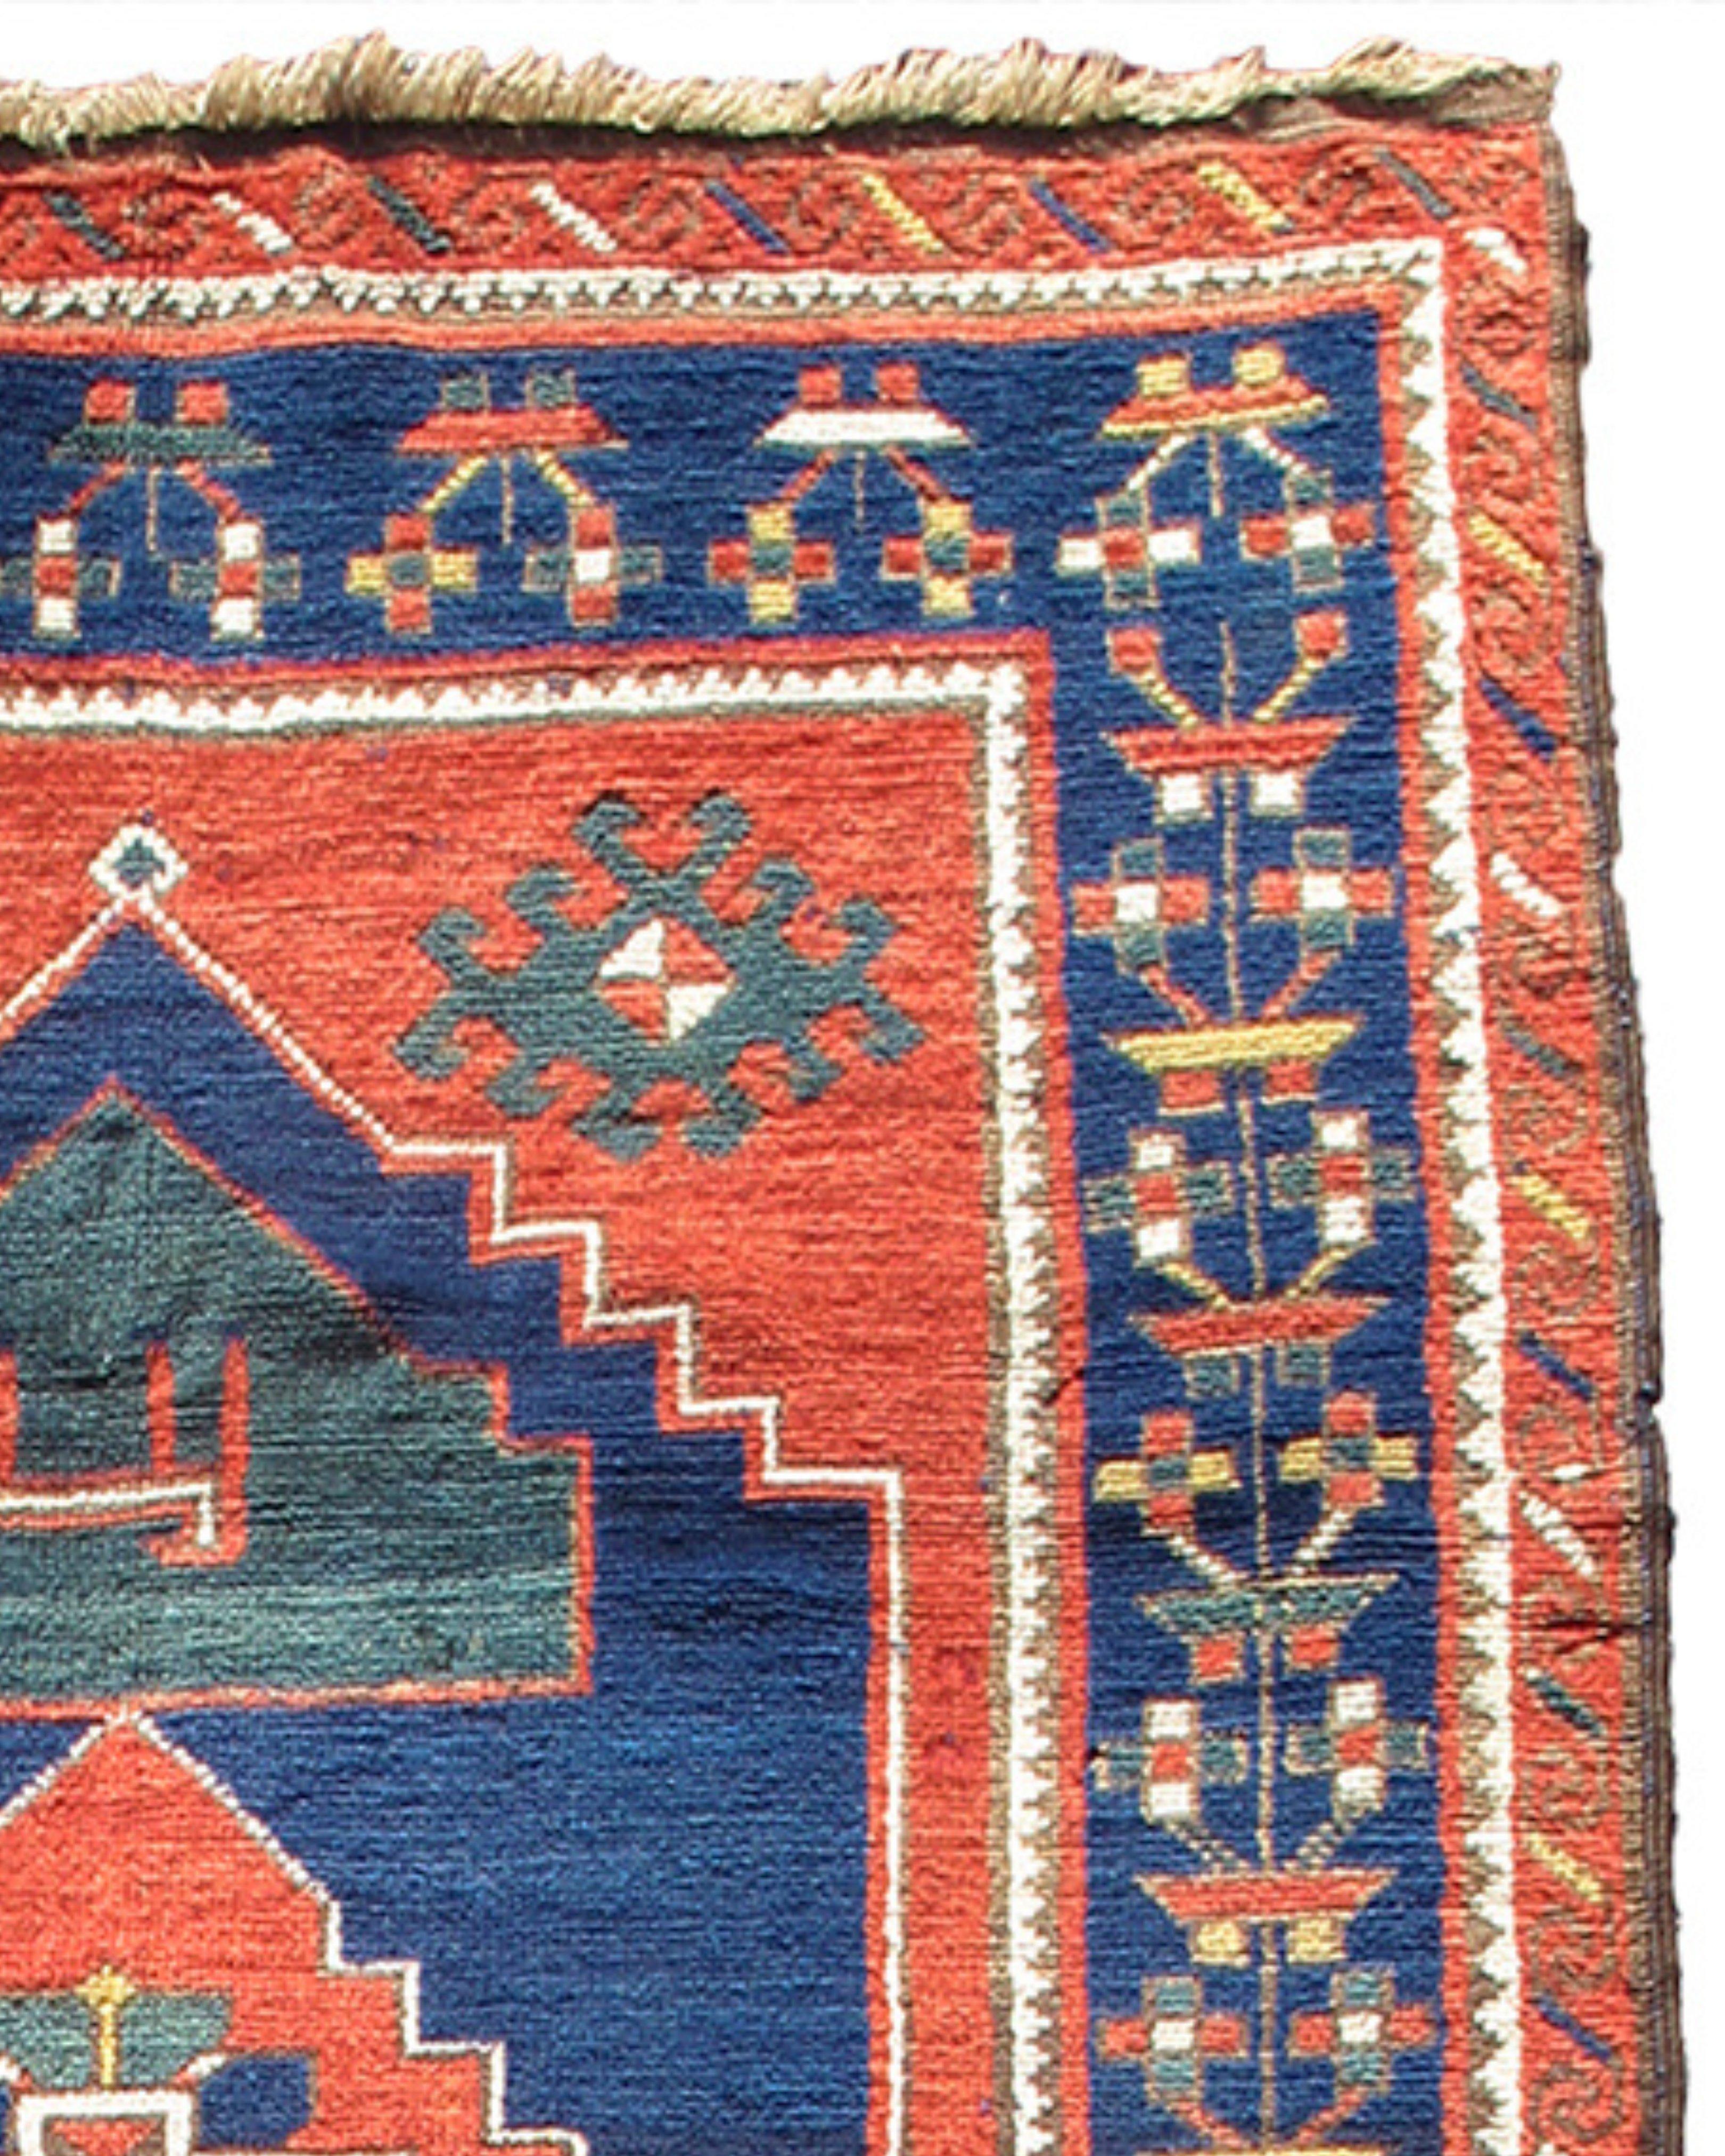 Antique Karabagh Rug, Late 19th Century

Additional Information:
Dimensions: 4'1